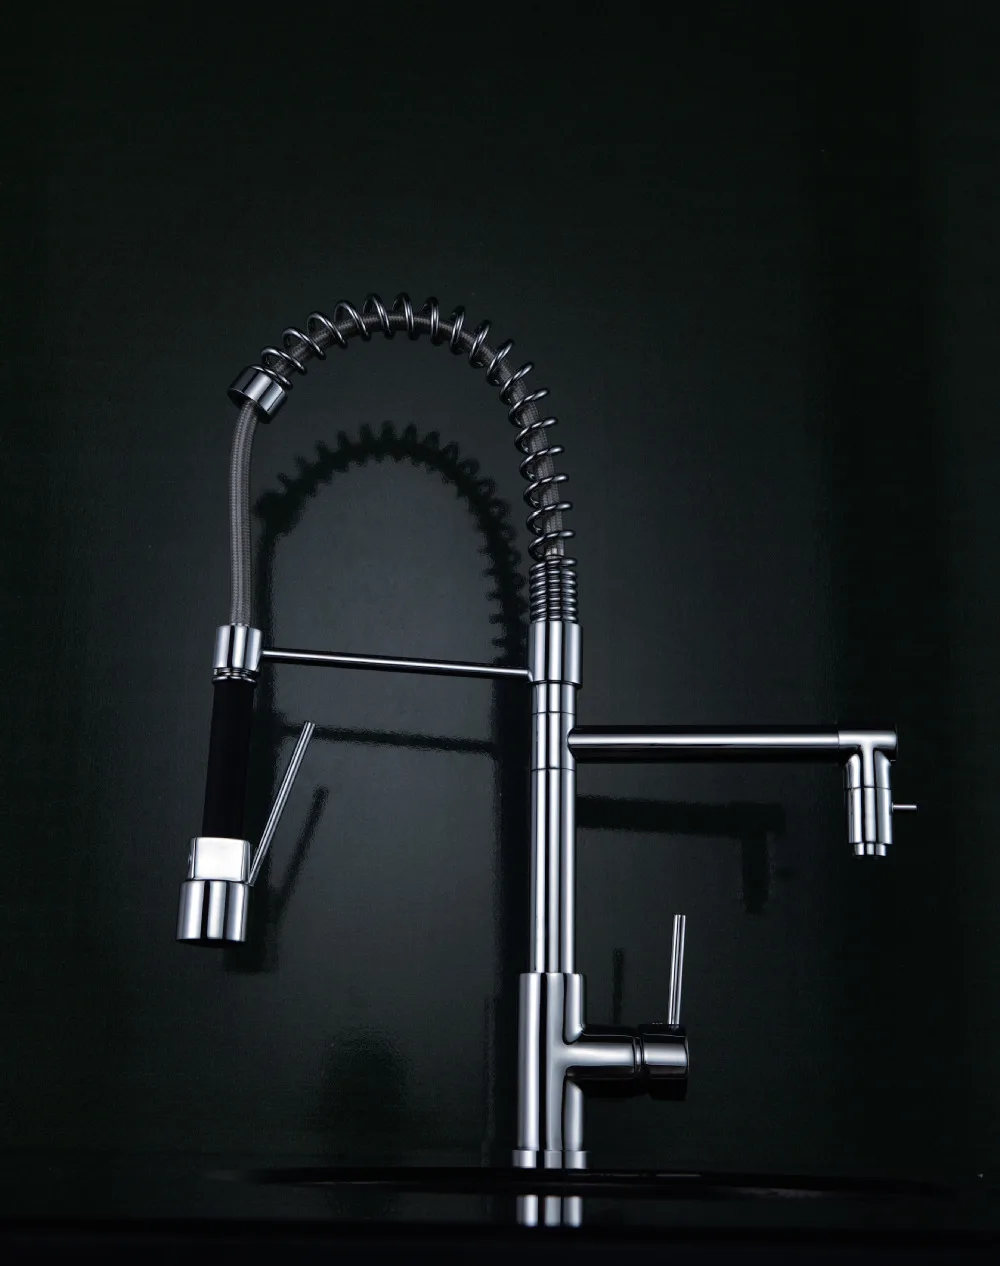 Best Selling Pull Down Beer Fitting Grohe Kitchen Sink Faucet